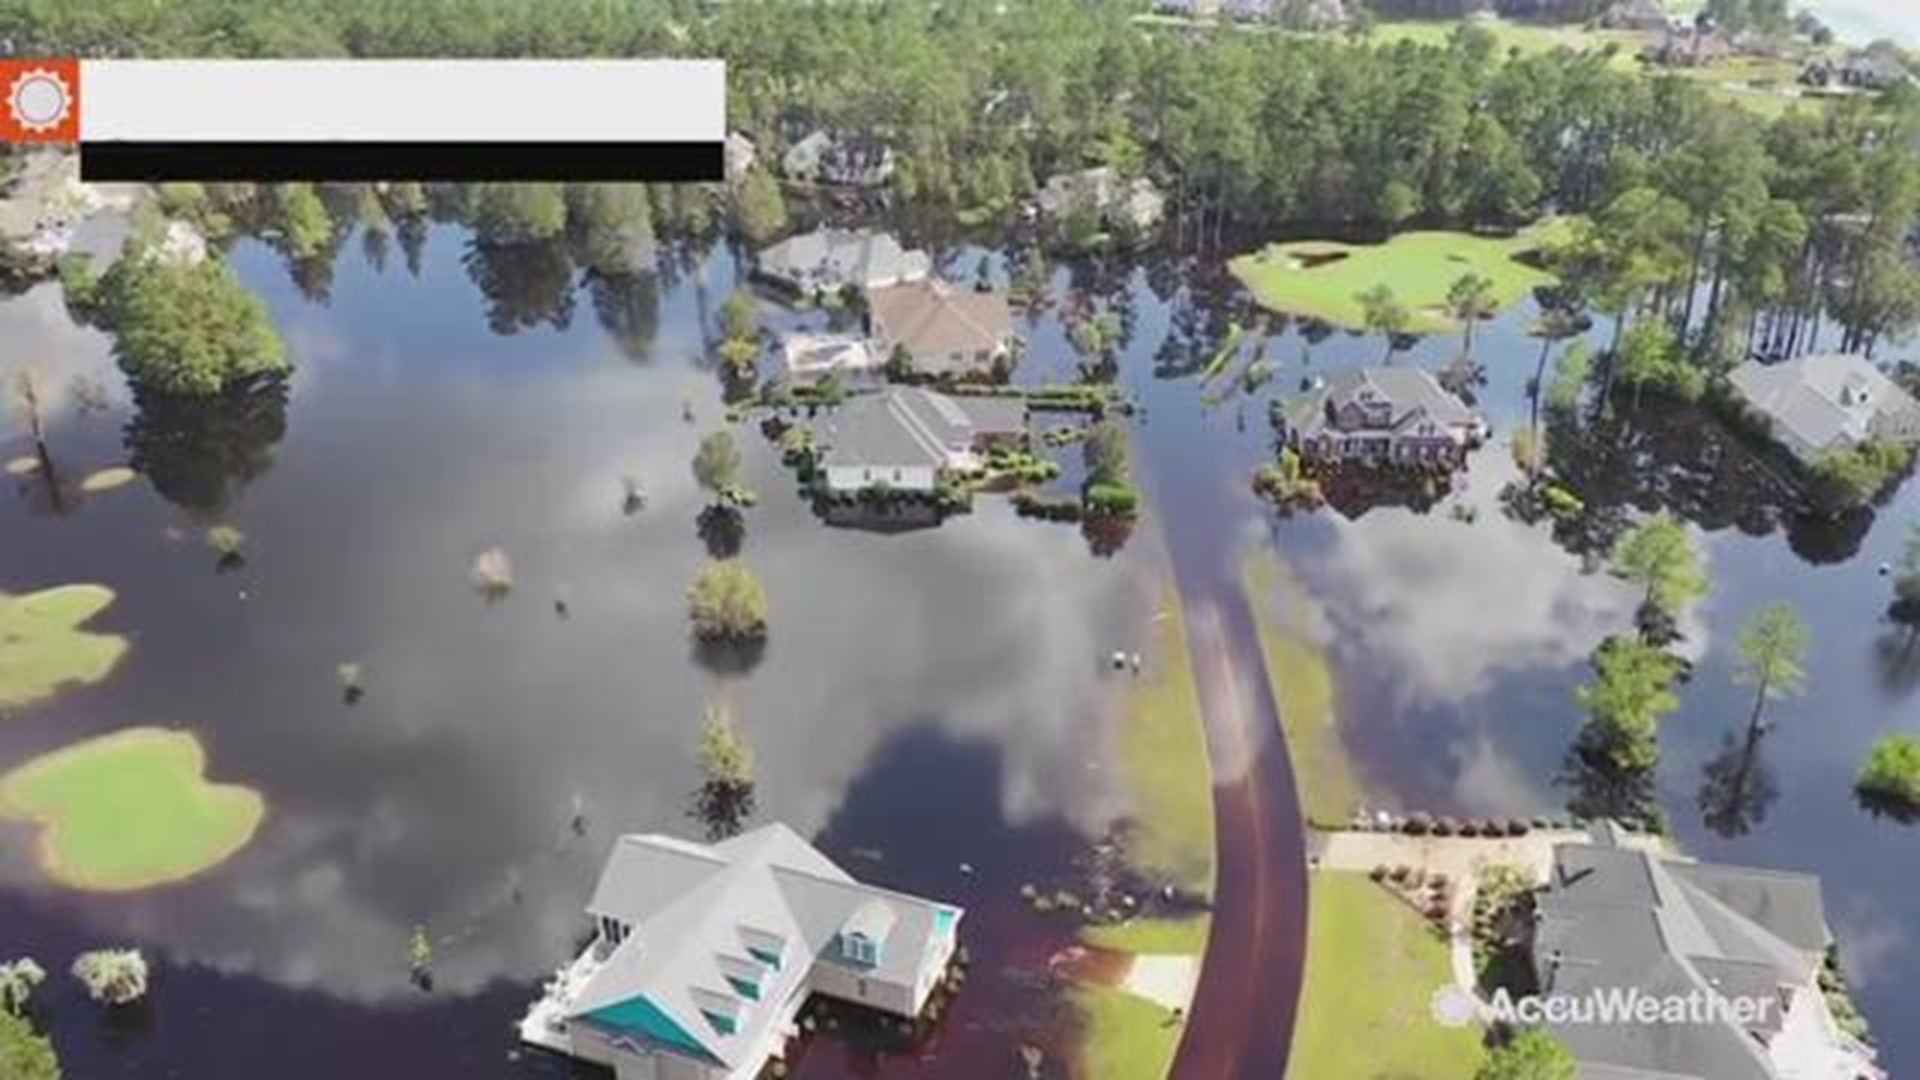 These aerials show the extent of the flooding from the Waccamaw River to surrounding communities in North Carolina and South Carolina.  The river has already crested at record levels and it's expected to rise to as high as 22 feet on Tuesday, Sept. 25.